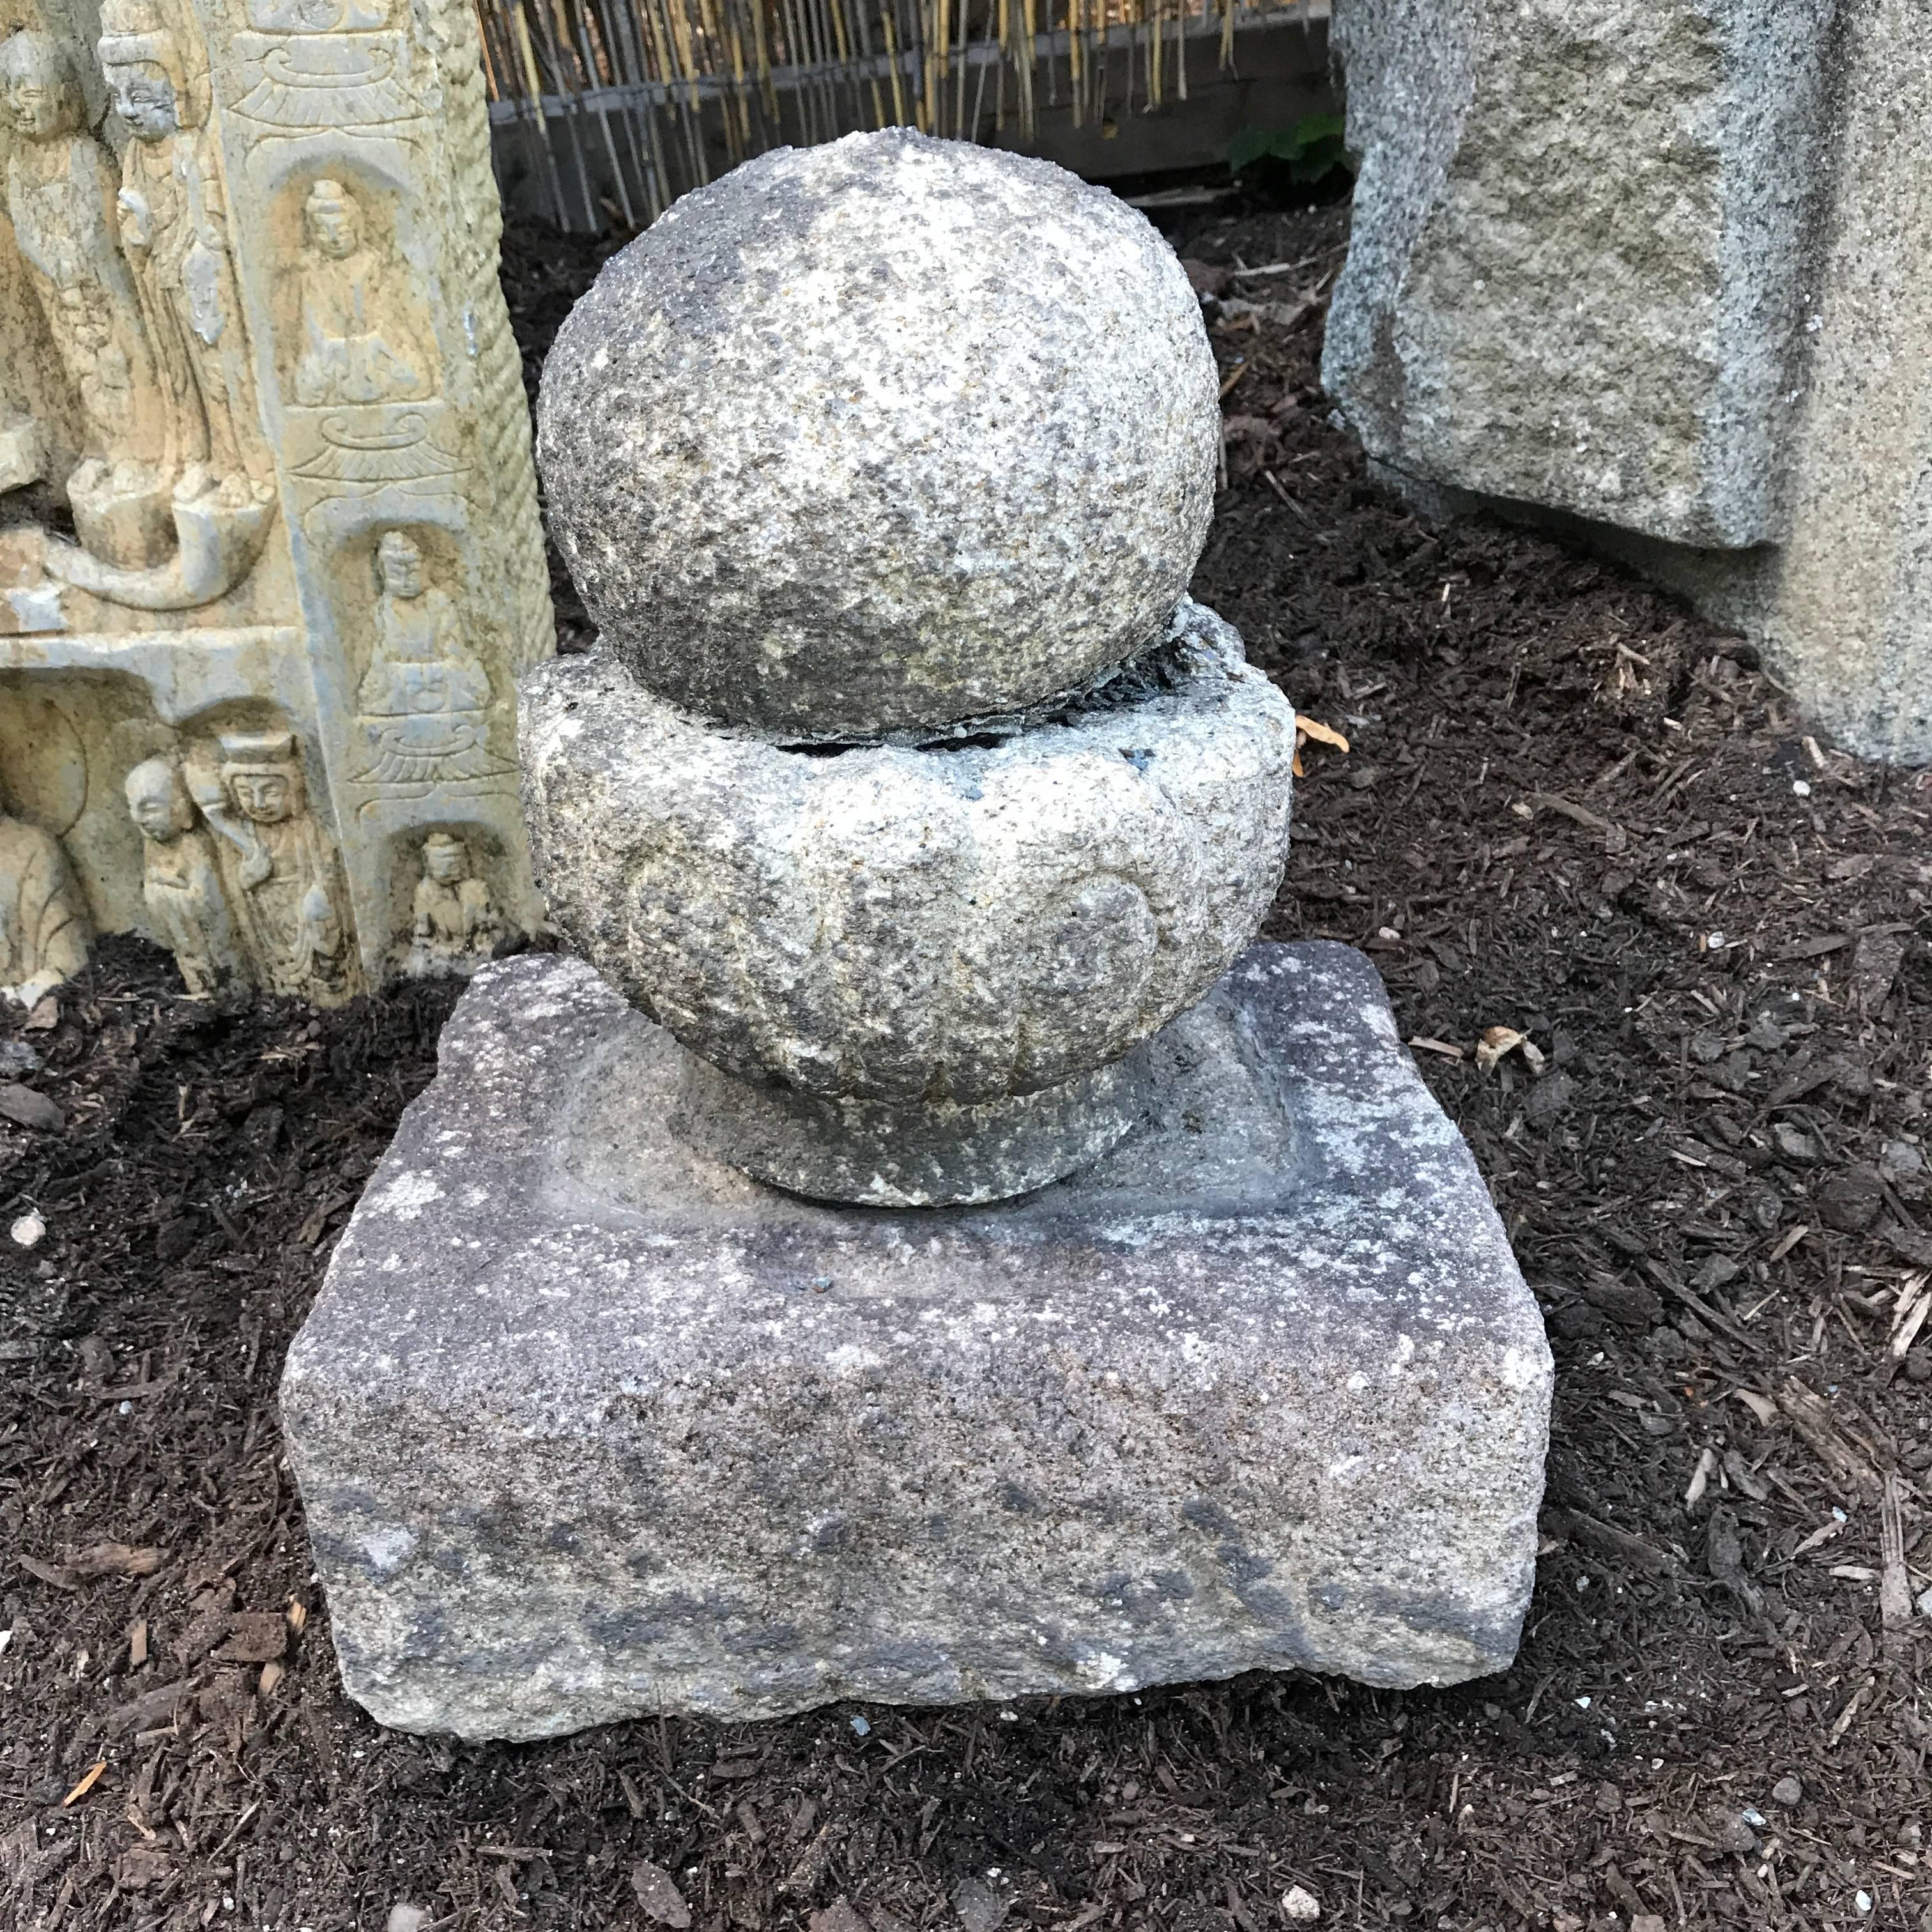 SALE - NOW SAVE 20% OR MORE

Japan ancient stone Stupa ornament, 100-200 years old representative of worldly elements earth, water, and universe.

Here's a beautiful and unique way to accent your indoor or outdoor garden space with this rare